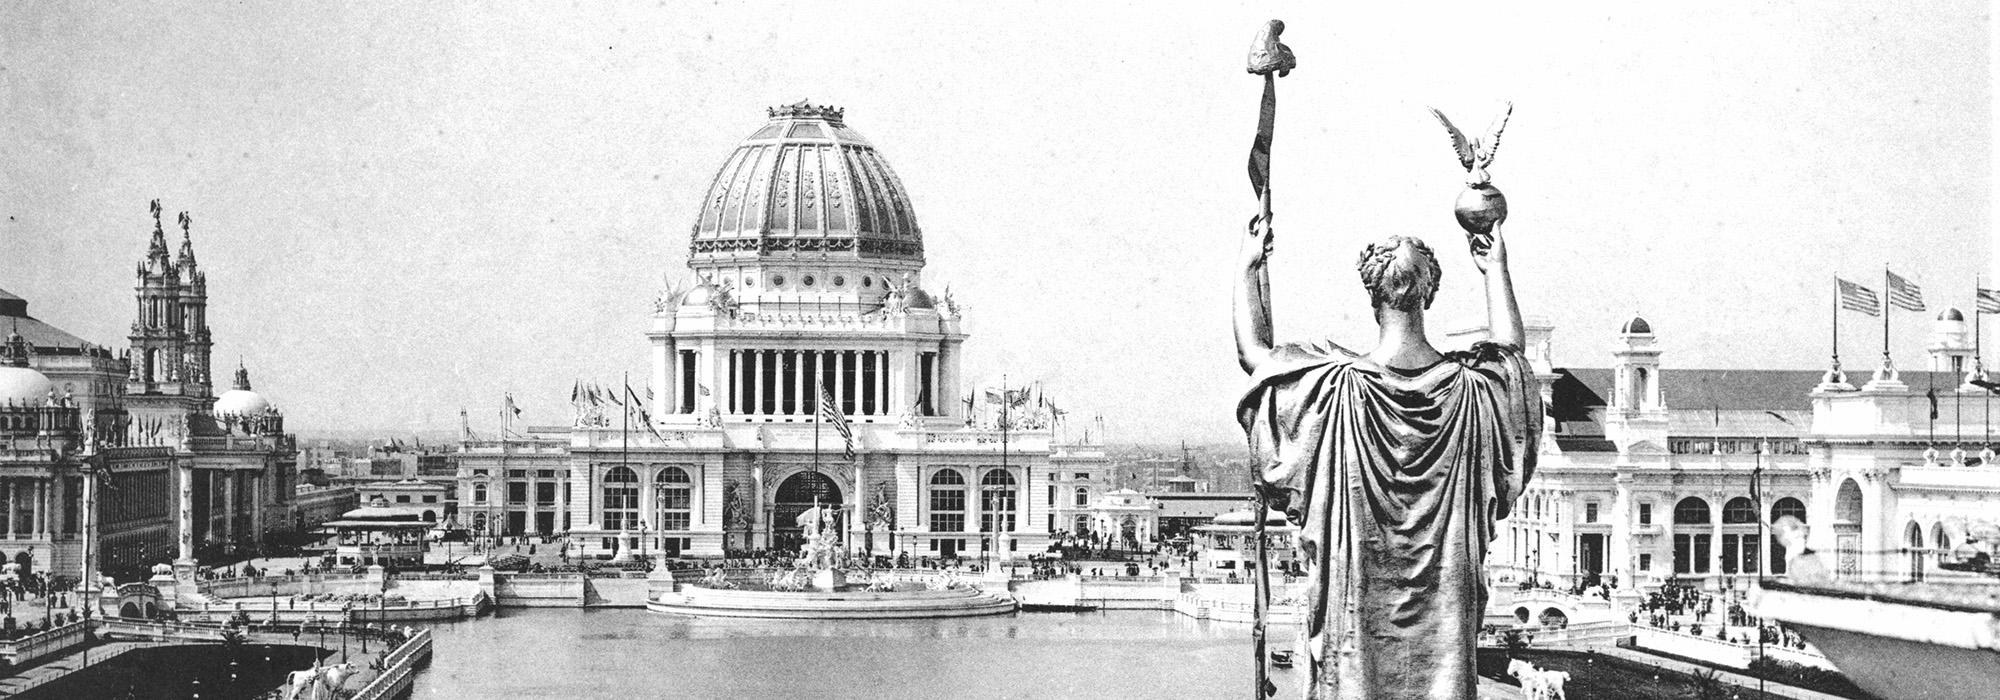 Court of Honor and Grand Basin of the 1893 World's Columbian Exposition, Chicago, IL